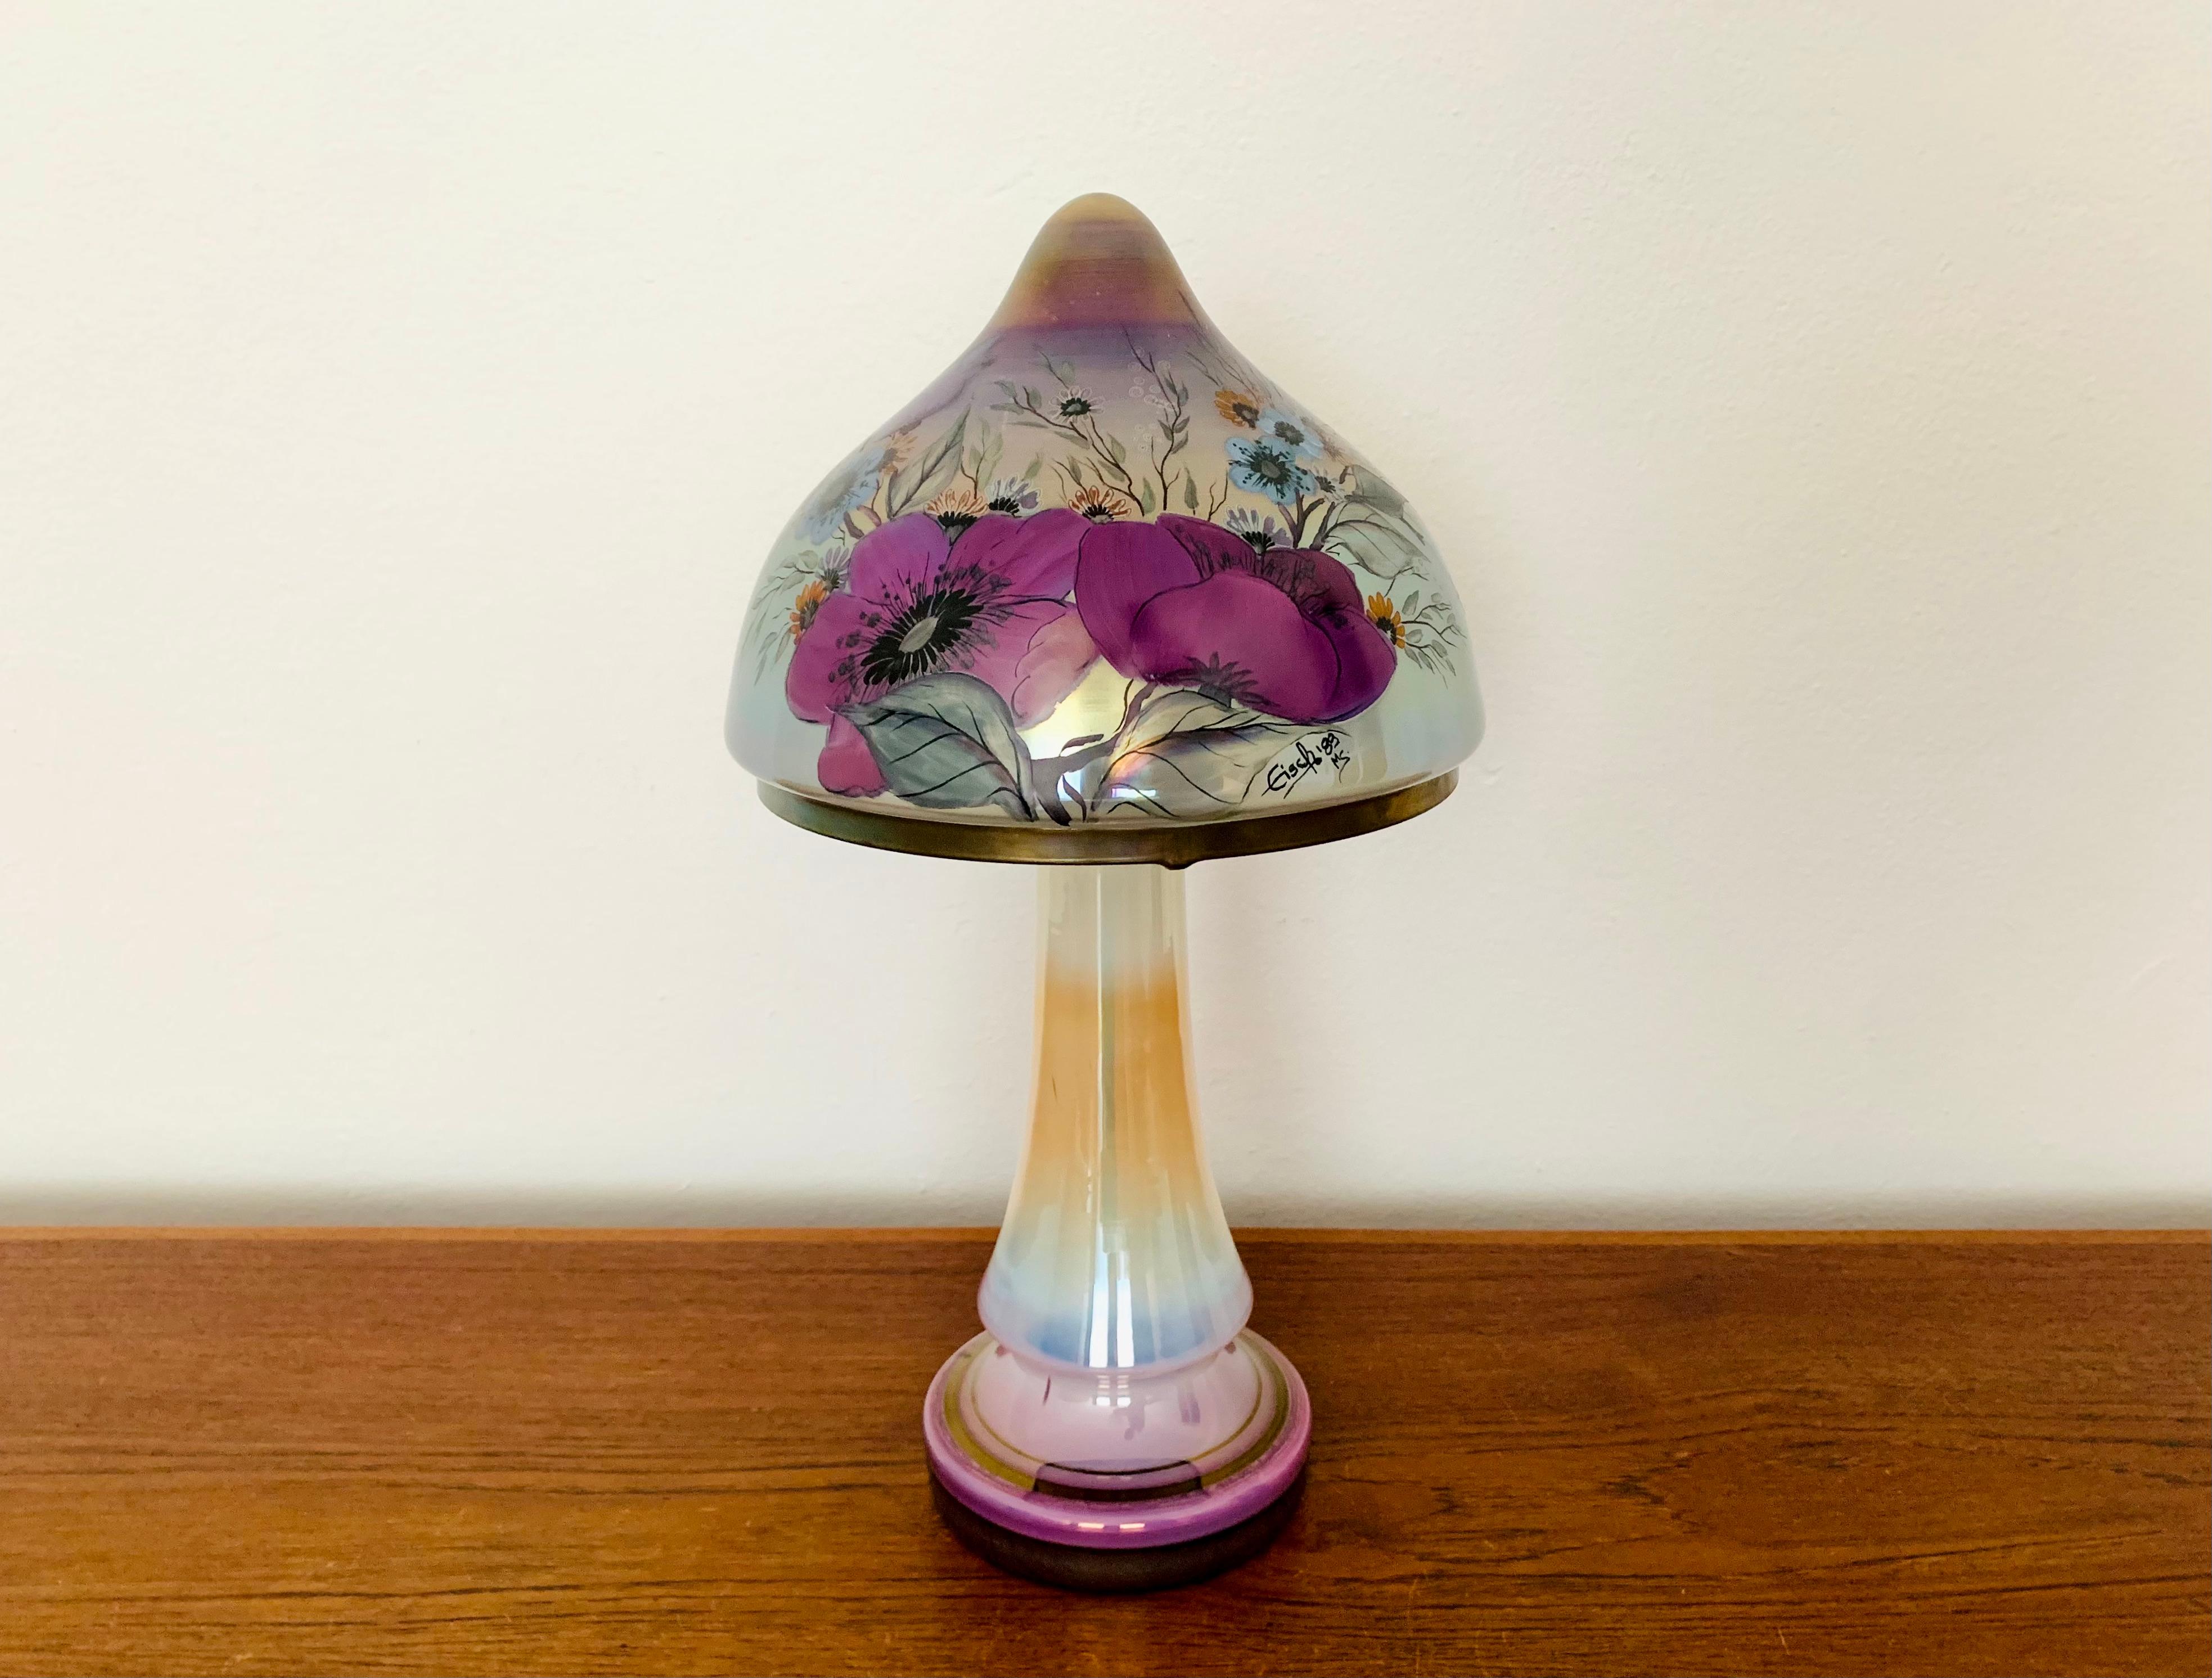 Very nice and high -quality hand -painted glass table lamp from the 1980s.
The lamp is very noble and a very special design object.
The glass and the colored painting create a very pleasant light.

Condition:

Very good vintage condition with slight